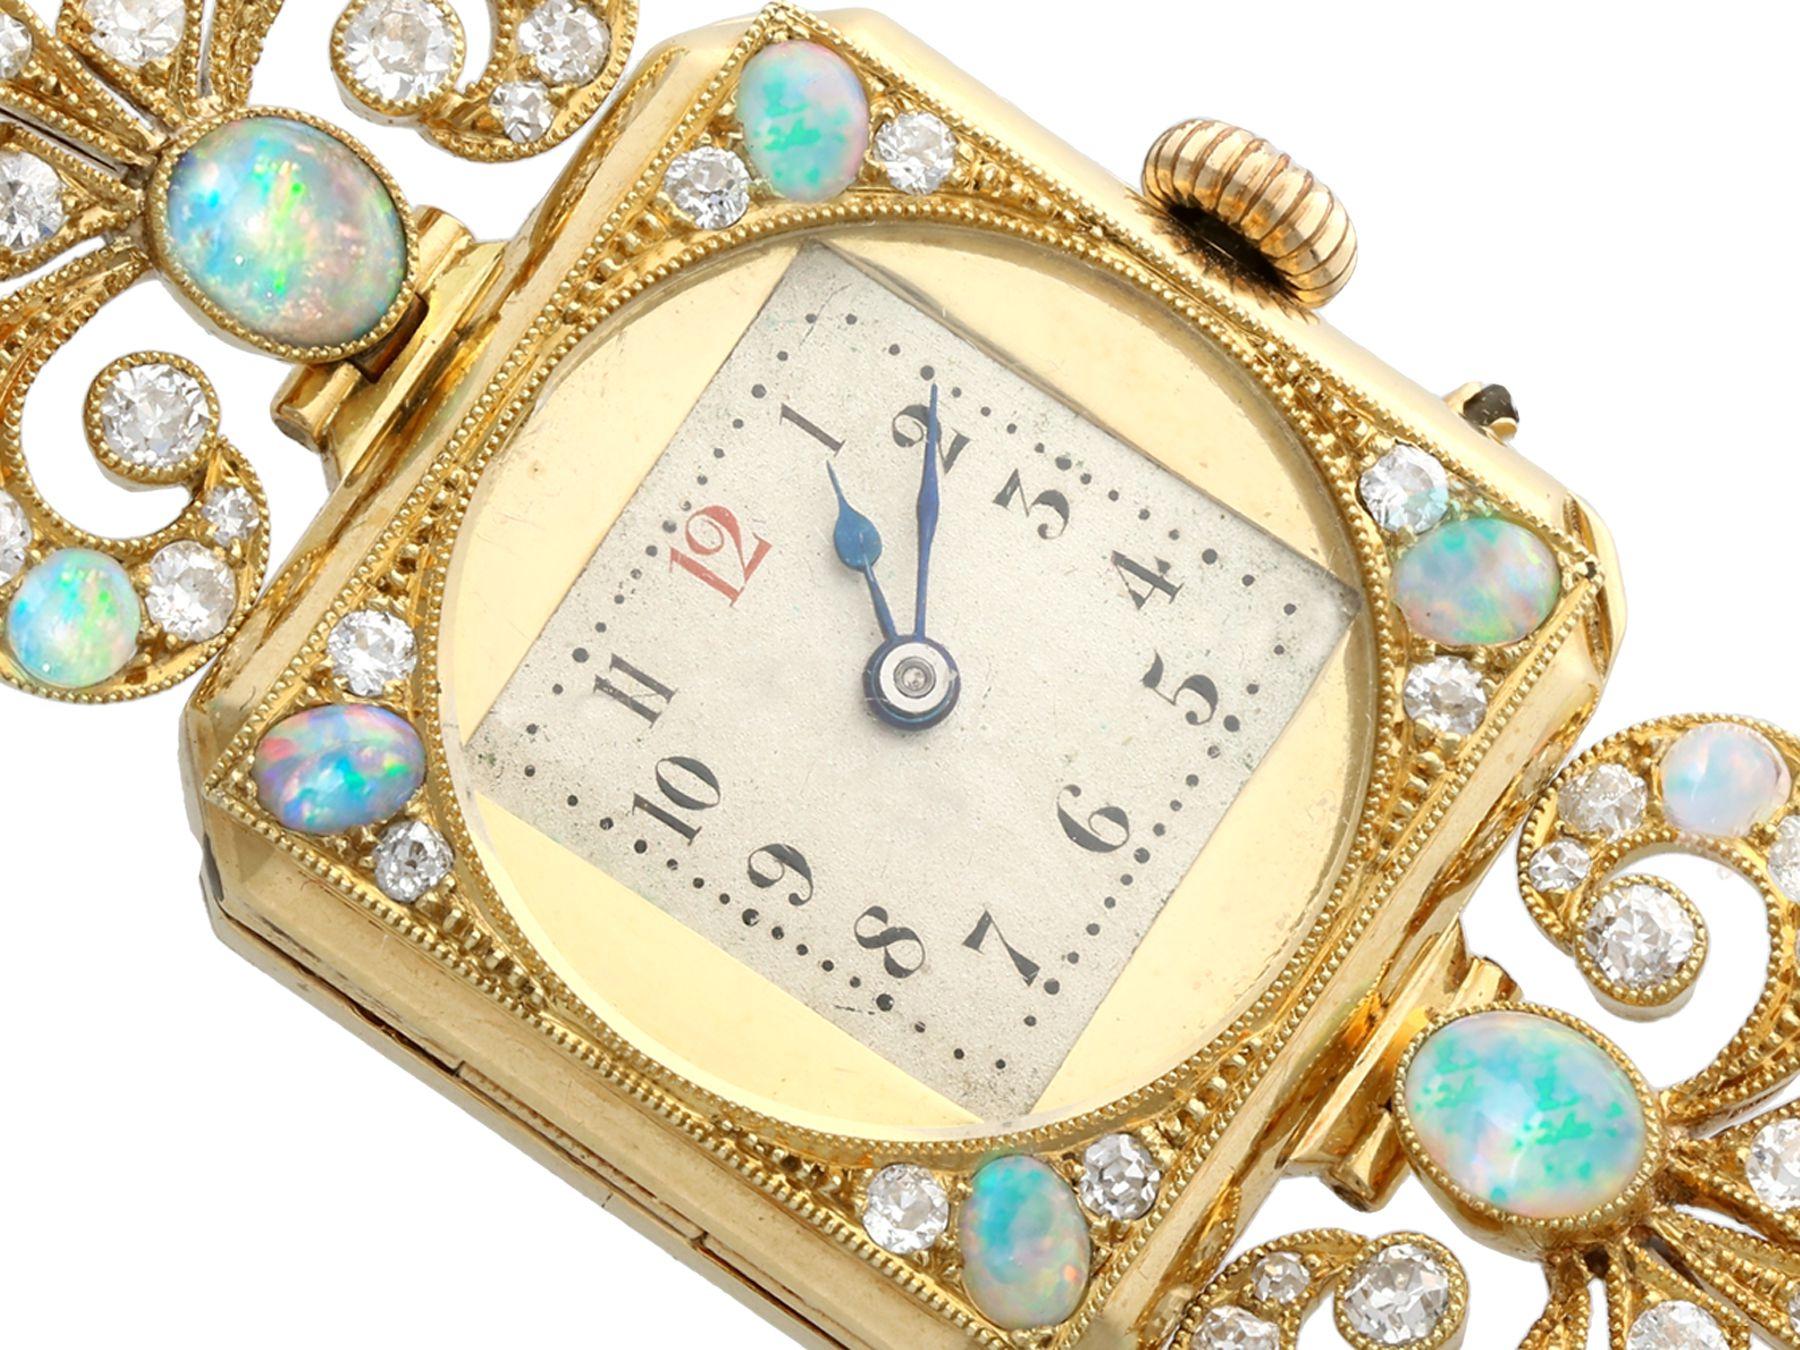 A stunning, fine and impressive antique Edwardian 2.12 Carat opal and 1.09 Carat diamond, 18 karat yellow gold cocktail watch; part of our diverse vintage jewelry collections

This stunning, fine and impressive antique Edwardian watch has been